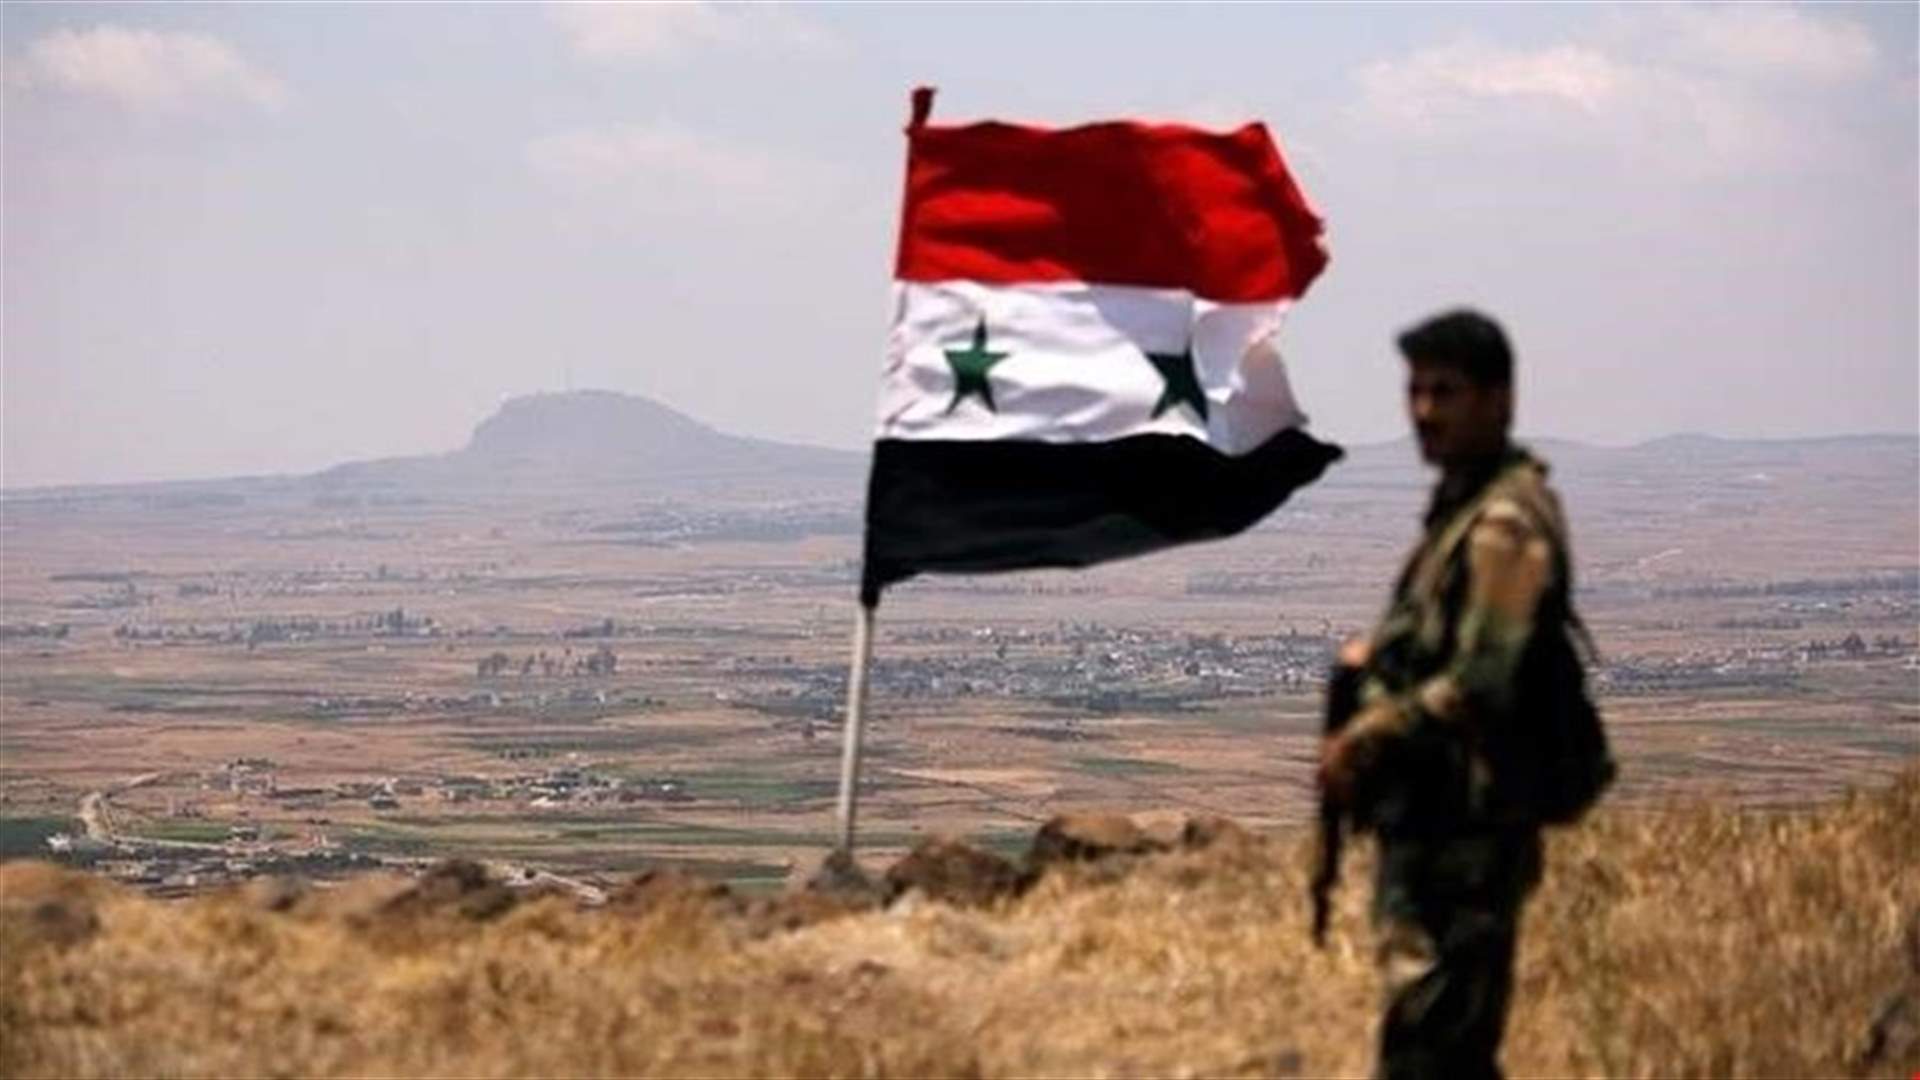 Syrian army demobilizes some conscripted, reservist officers